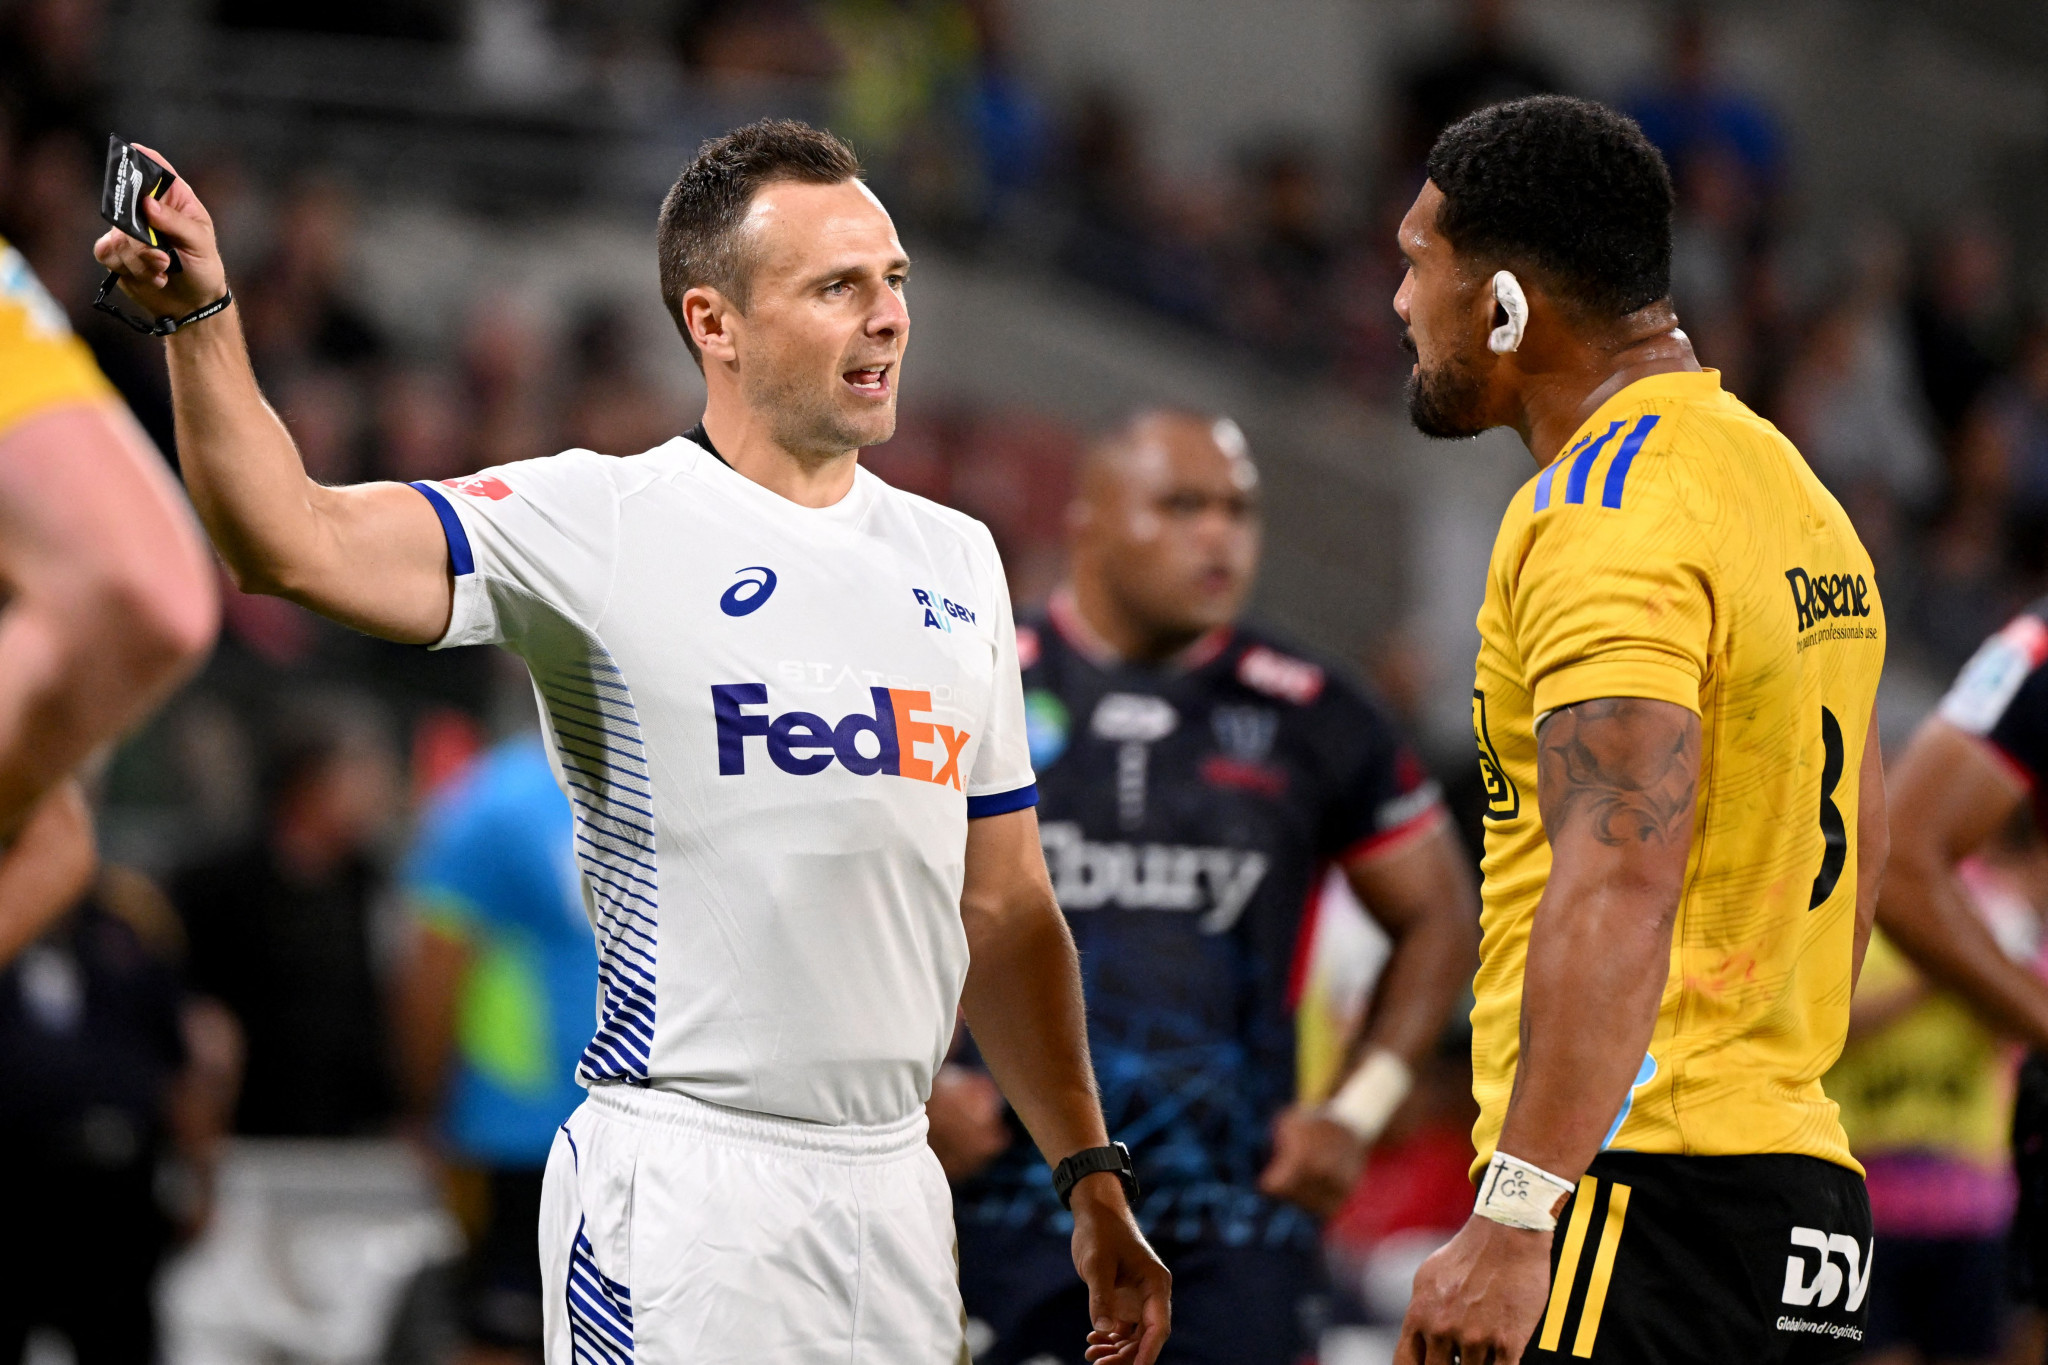 Ardie Savea had been sin binned before making the slit throat gesture to an opponent ©Getty Images